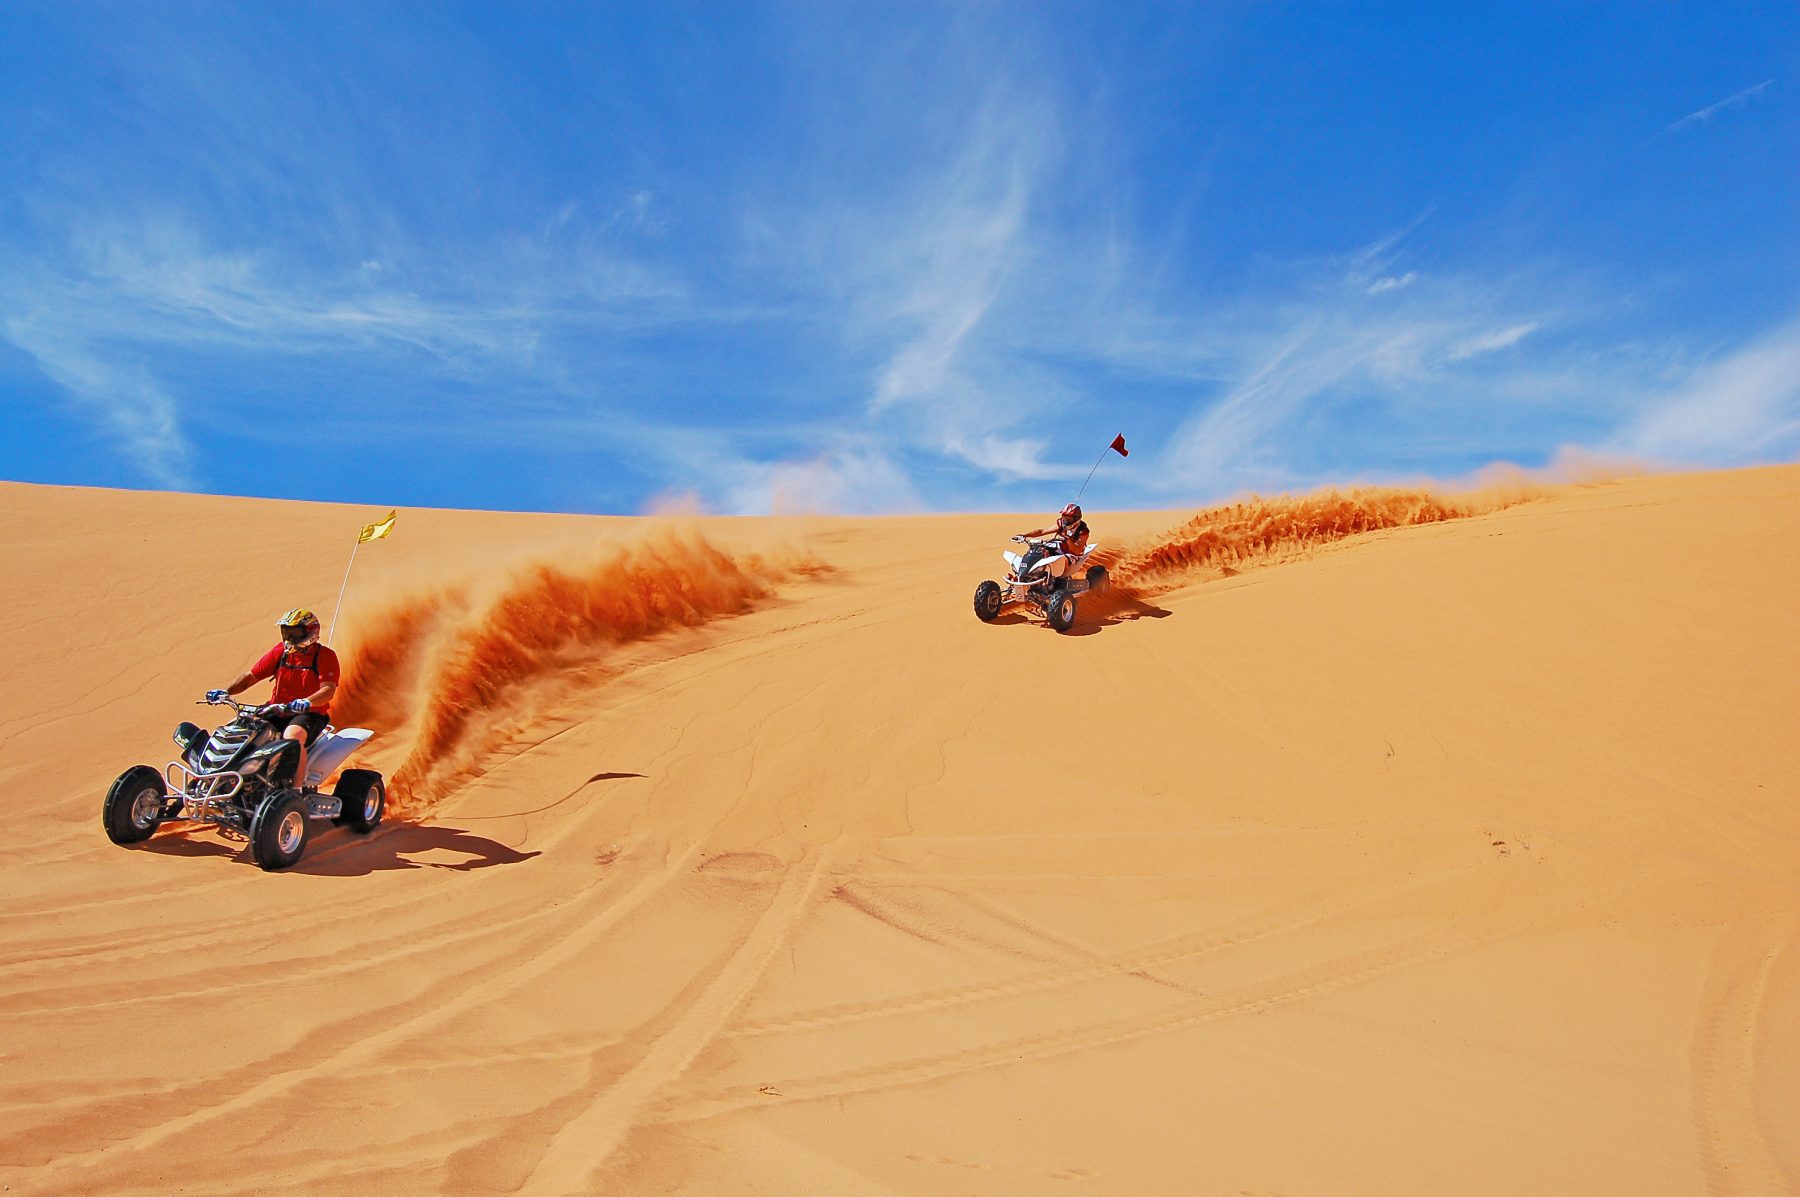 Vacation at Sand Mountain UTV Rentals and Tour Company